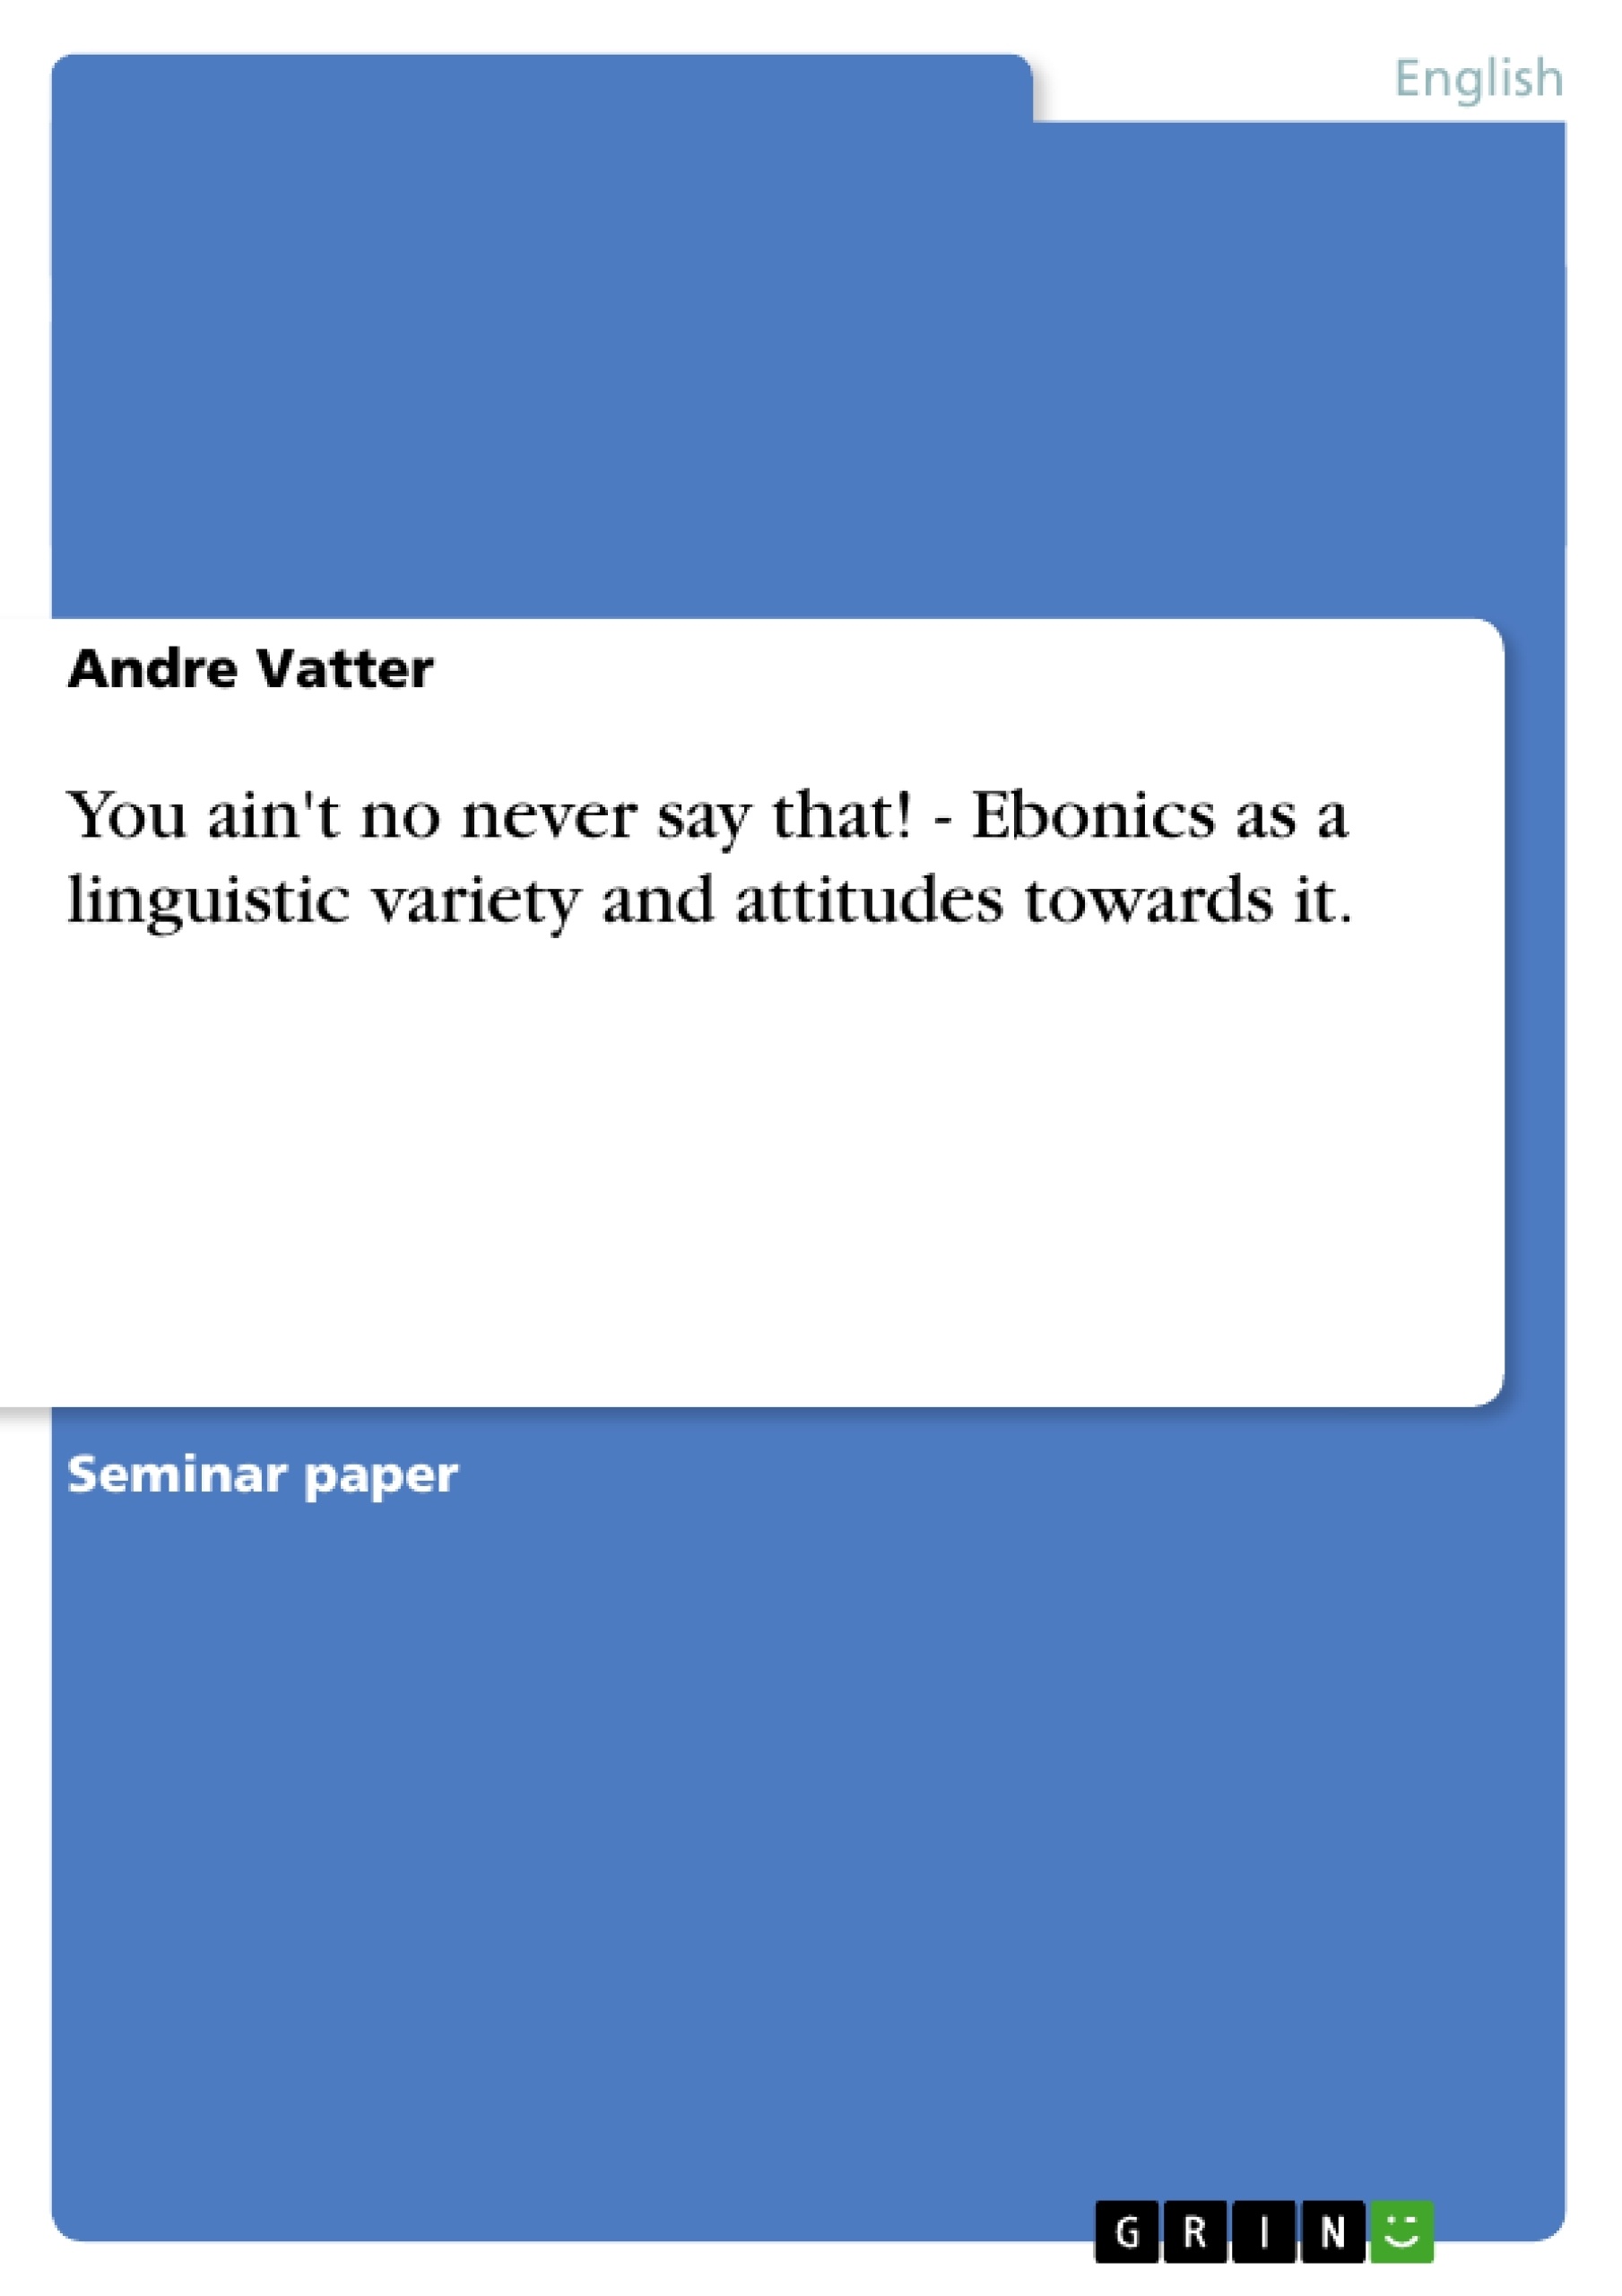 Titre: You ain't no never say that!  - Ebonics as a linguistic variety and attitudes towards it.